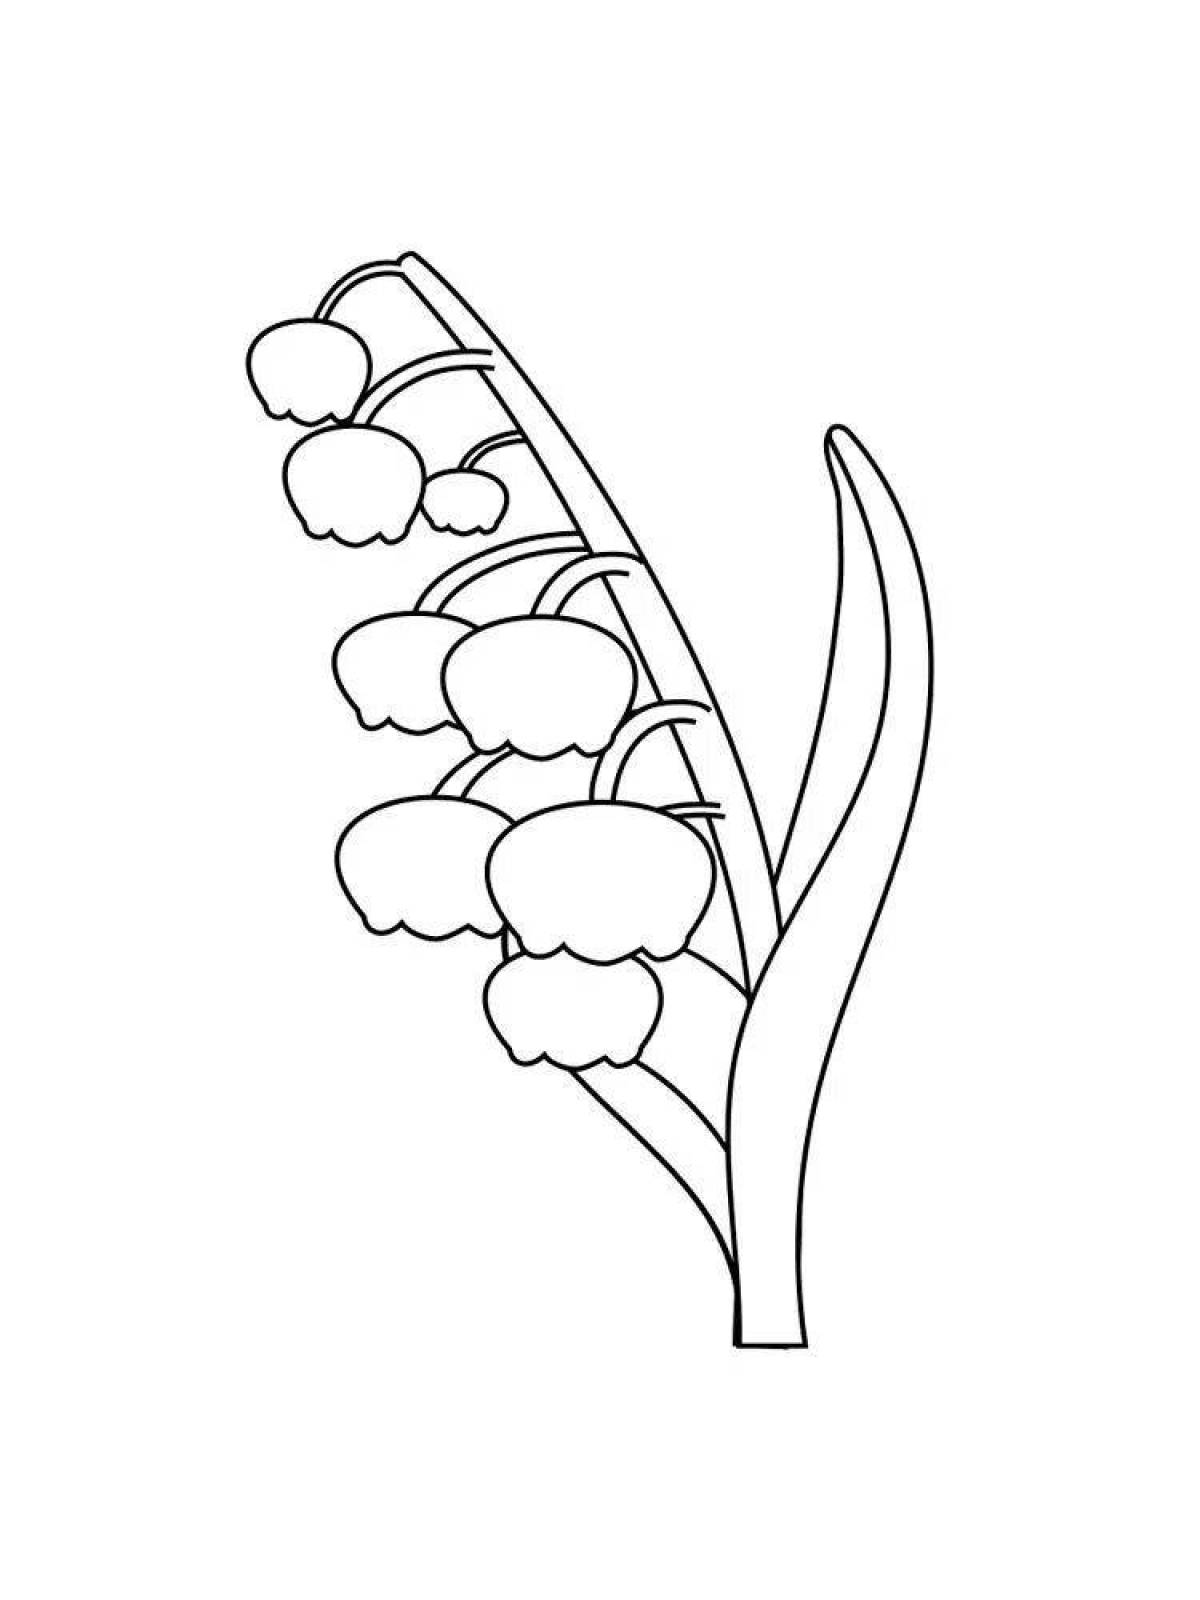 Fancy lily of the valley coloring book for kids